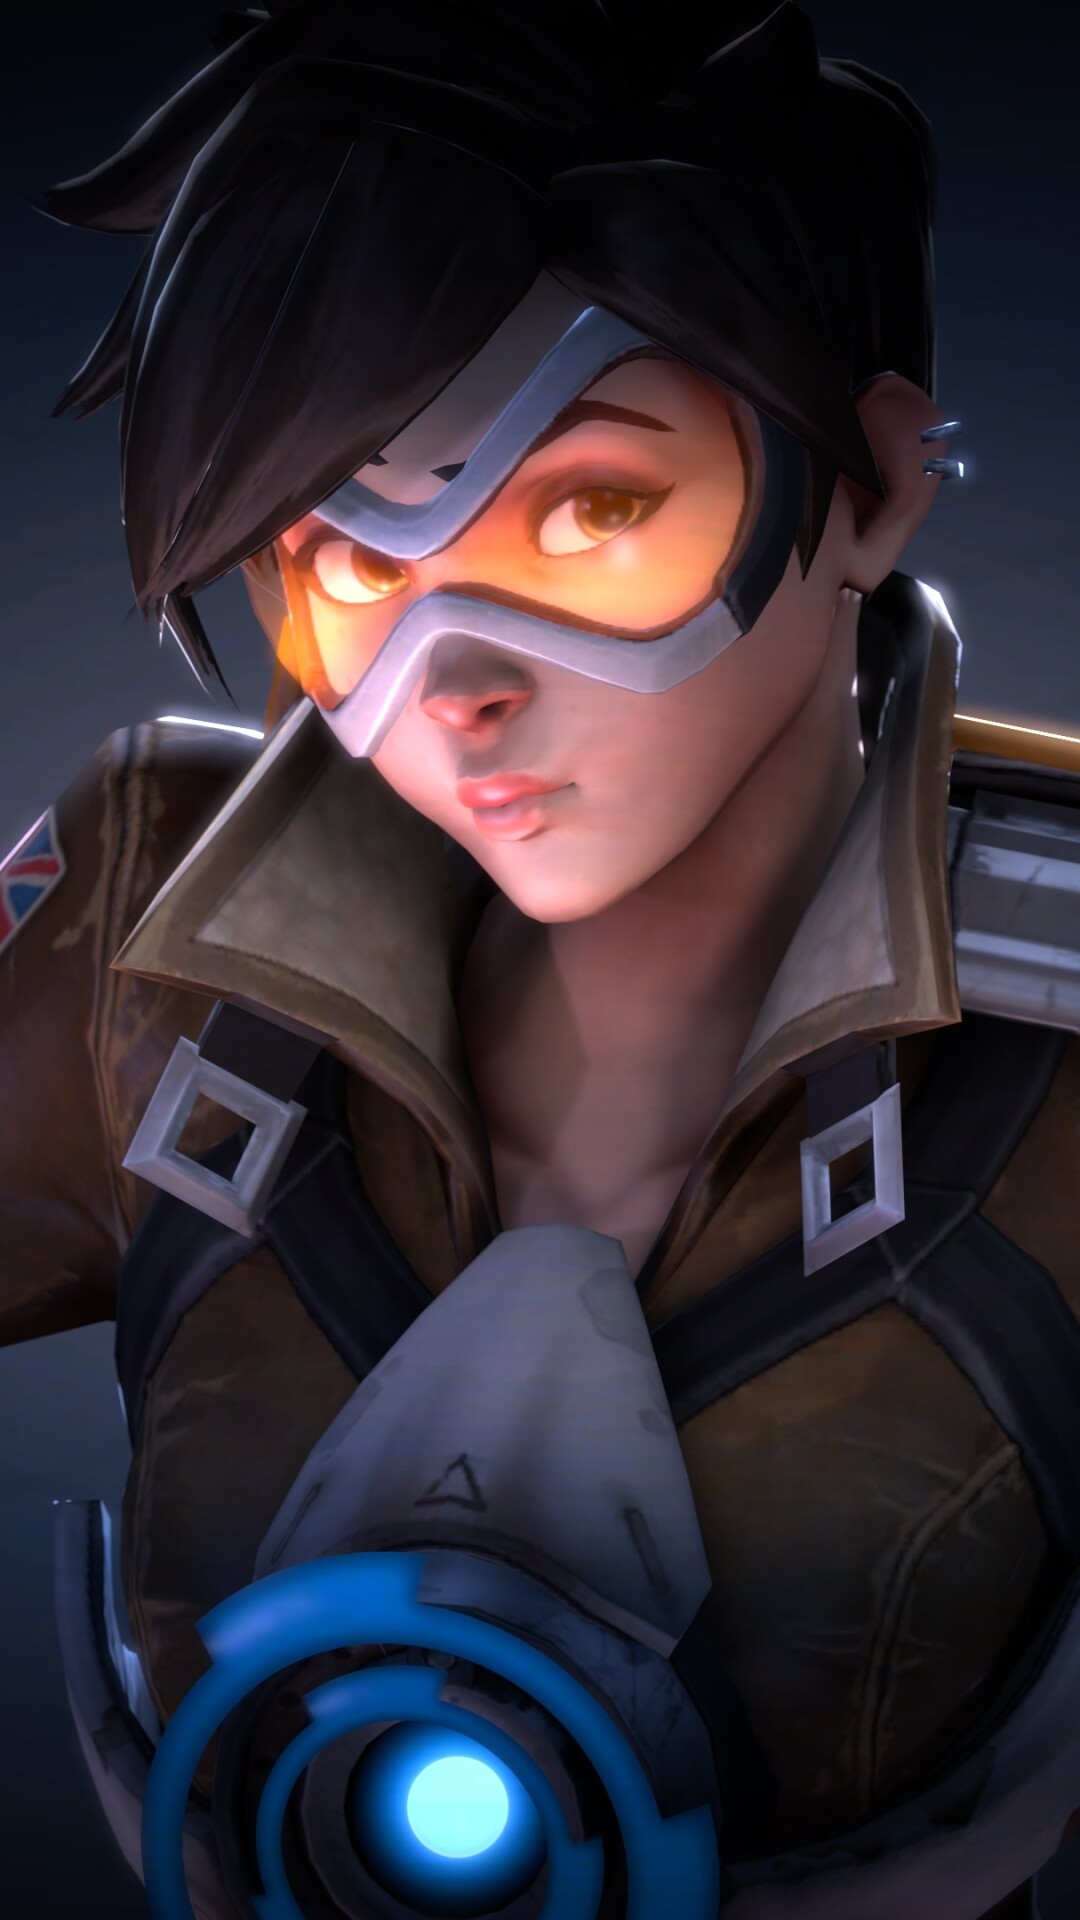 Overwatch: Video game, Tracer, A British pilot and adventurer. 1080x1920 Full HD Background.